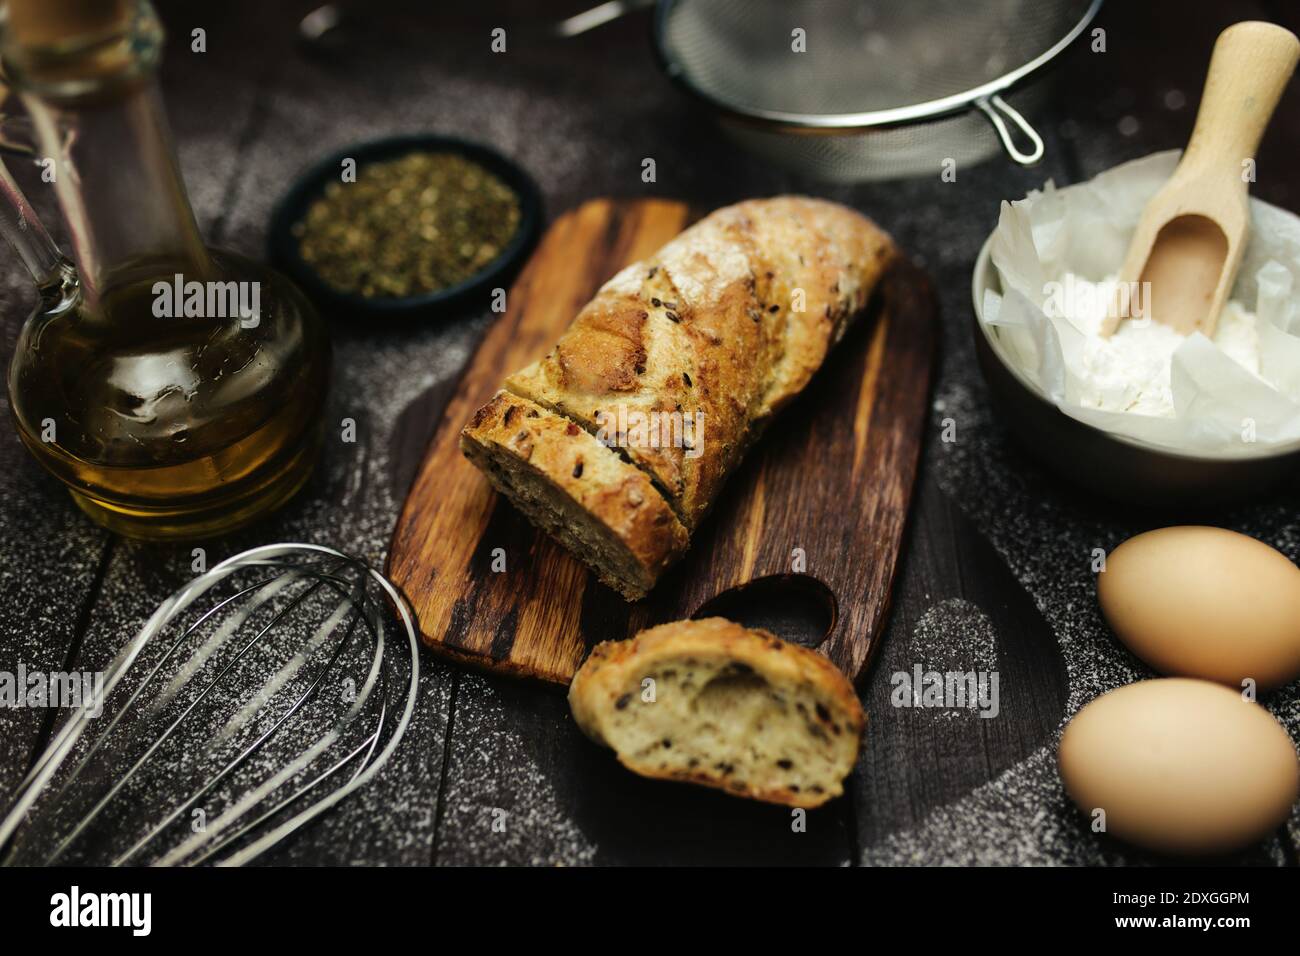 Fresh baked bread and baking ingredients on a table Stock Photo